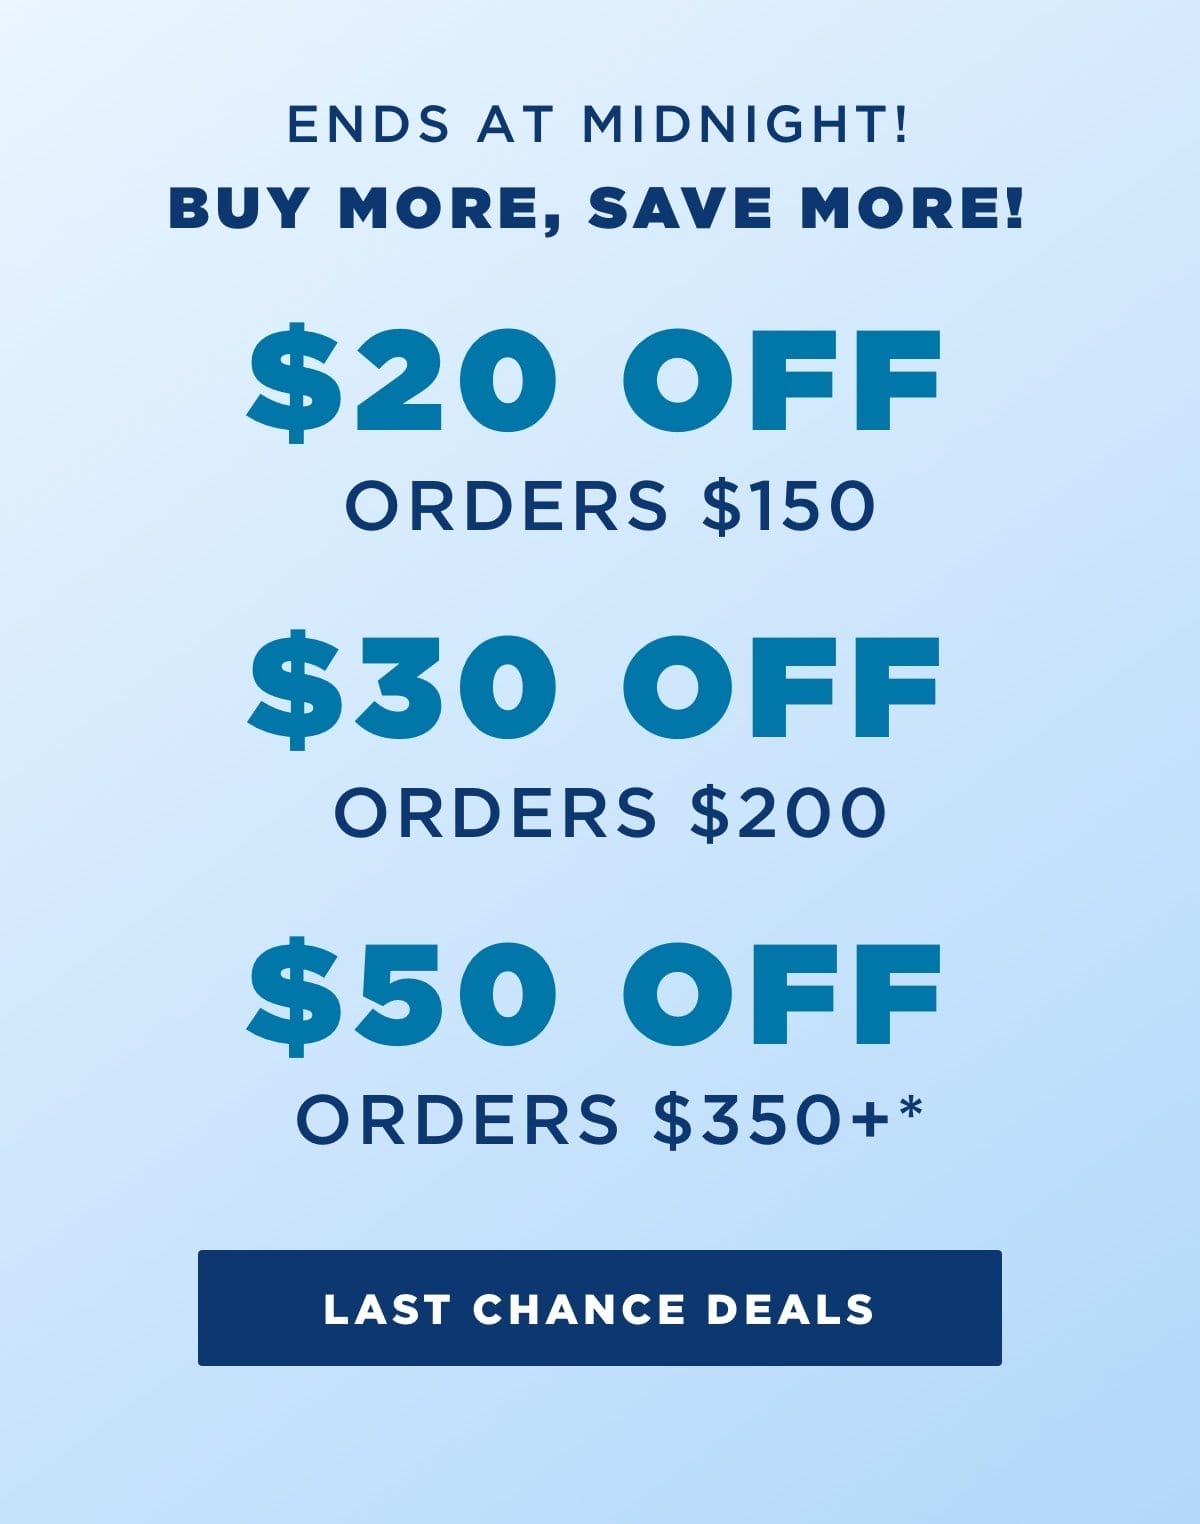 Buy more, save more up to \\$50 off your order